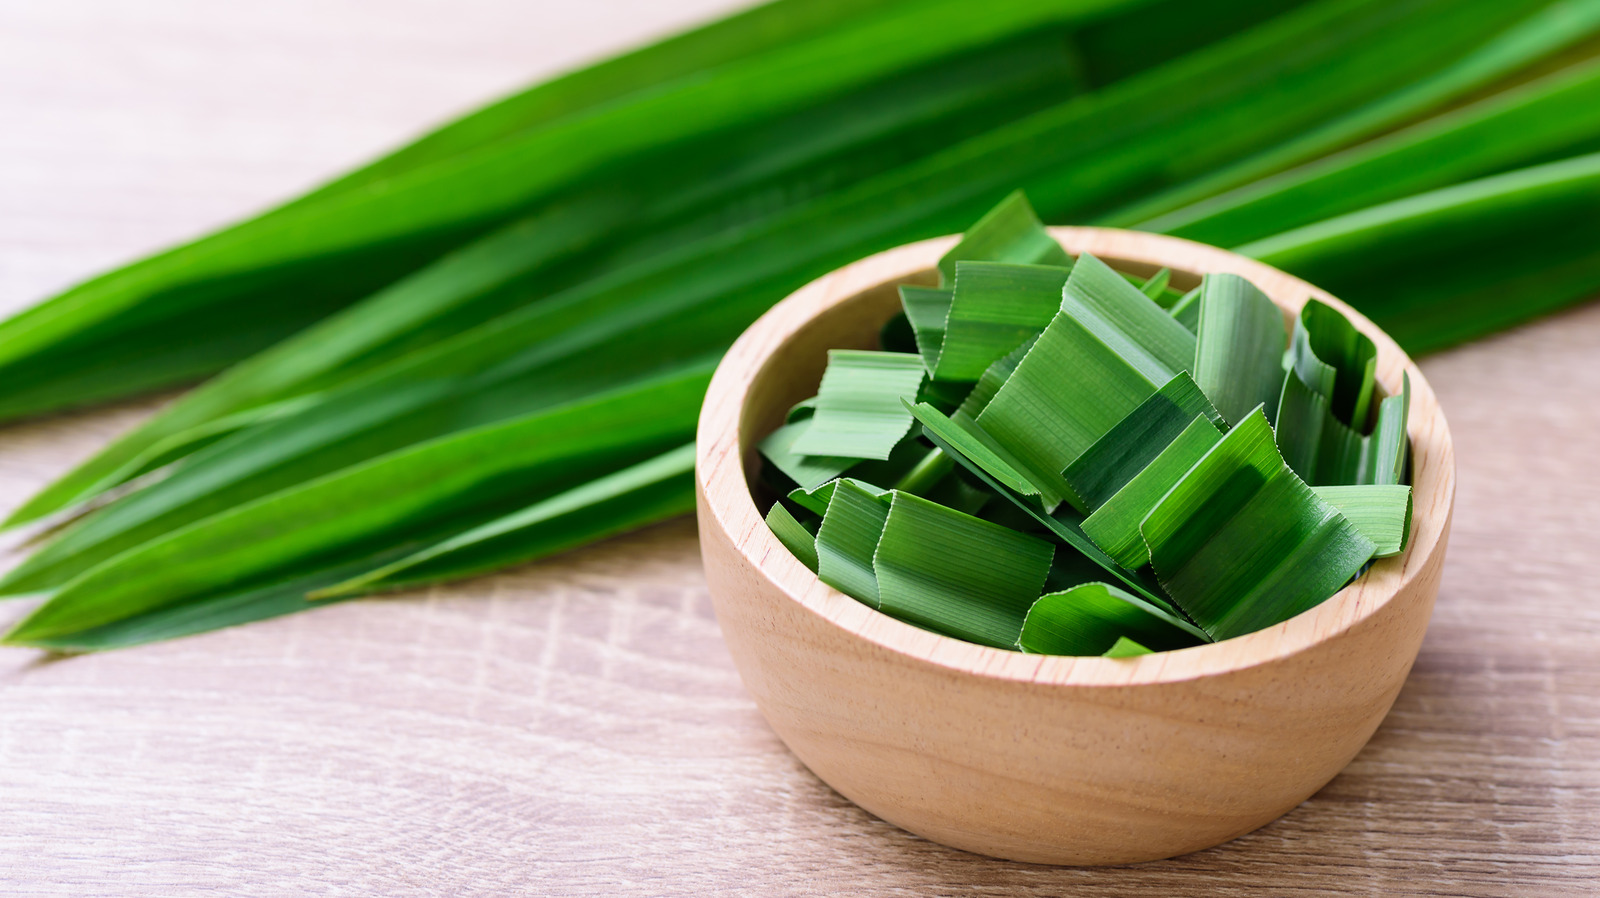 What Is Pandan And What Does It Taste Like?